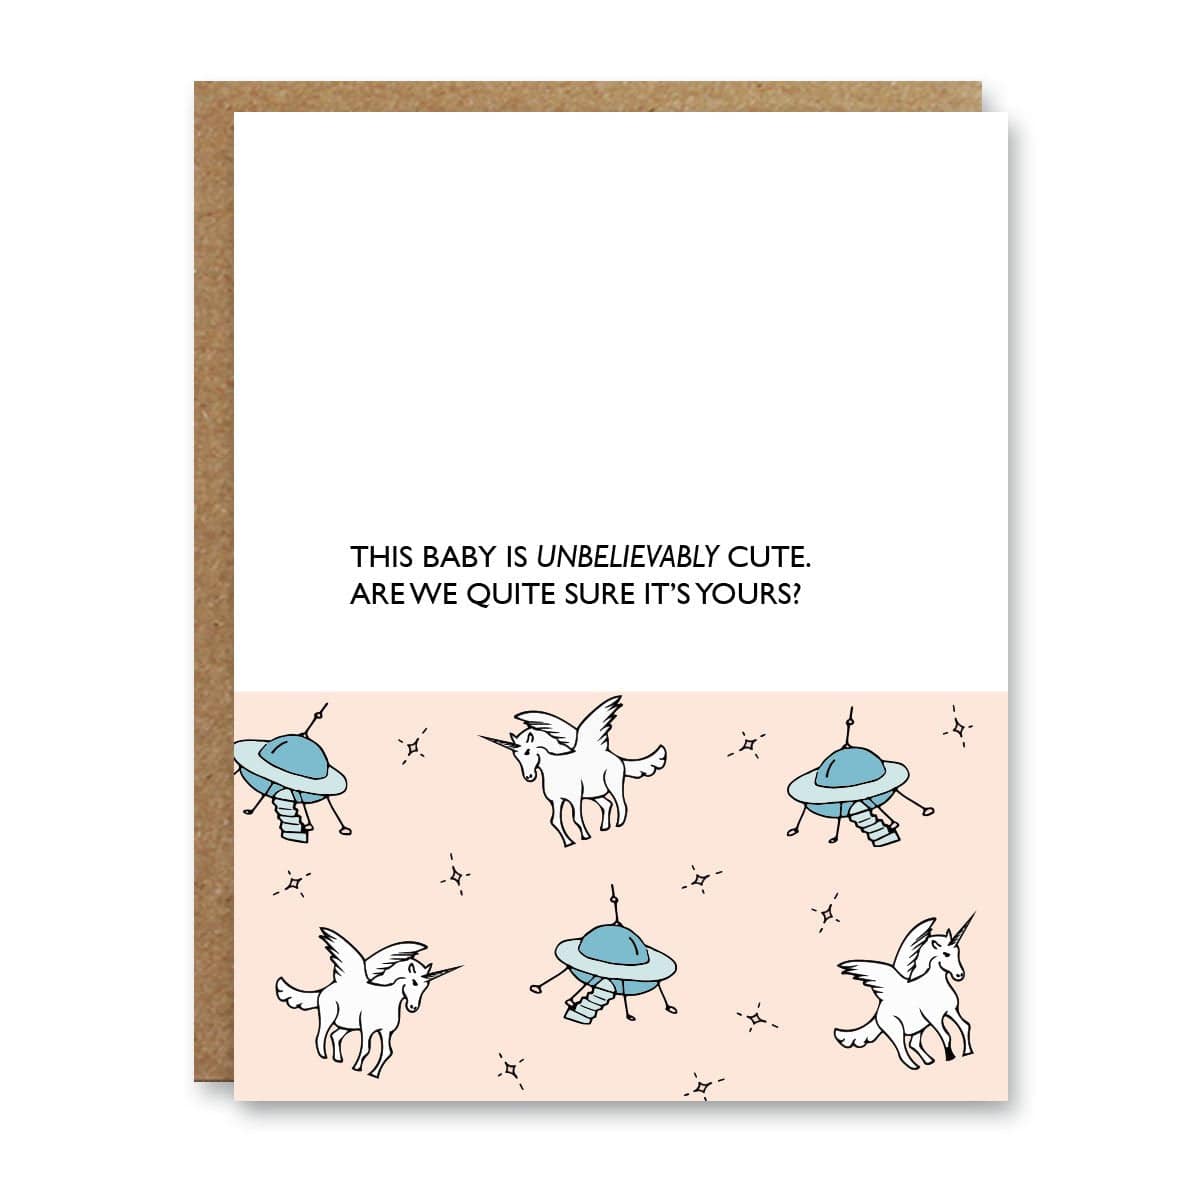 Boo To You Greeting Cards greeting card Boo To You 'This Baby Is Unbelievably Cute' Greeting Card